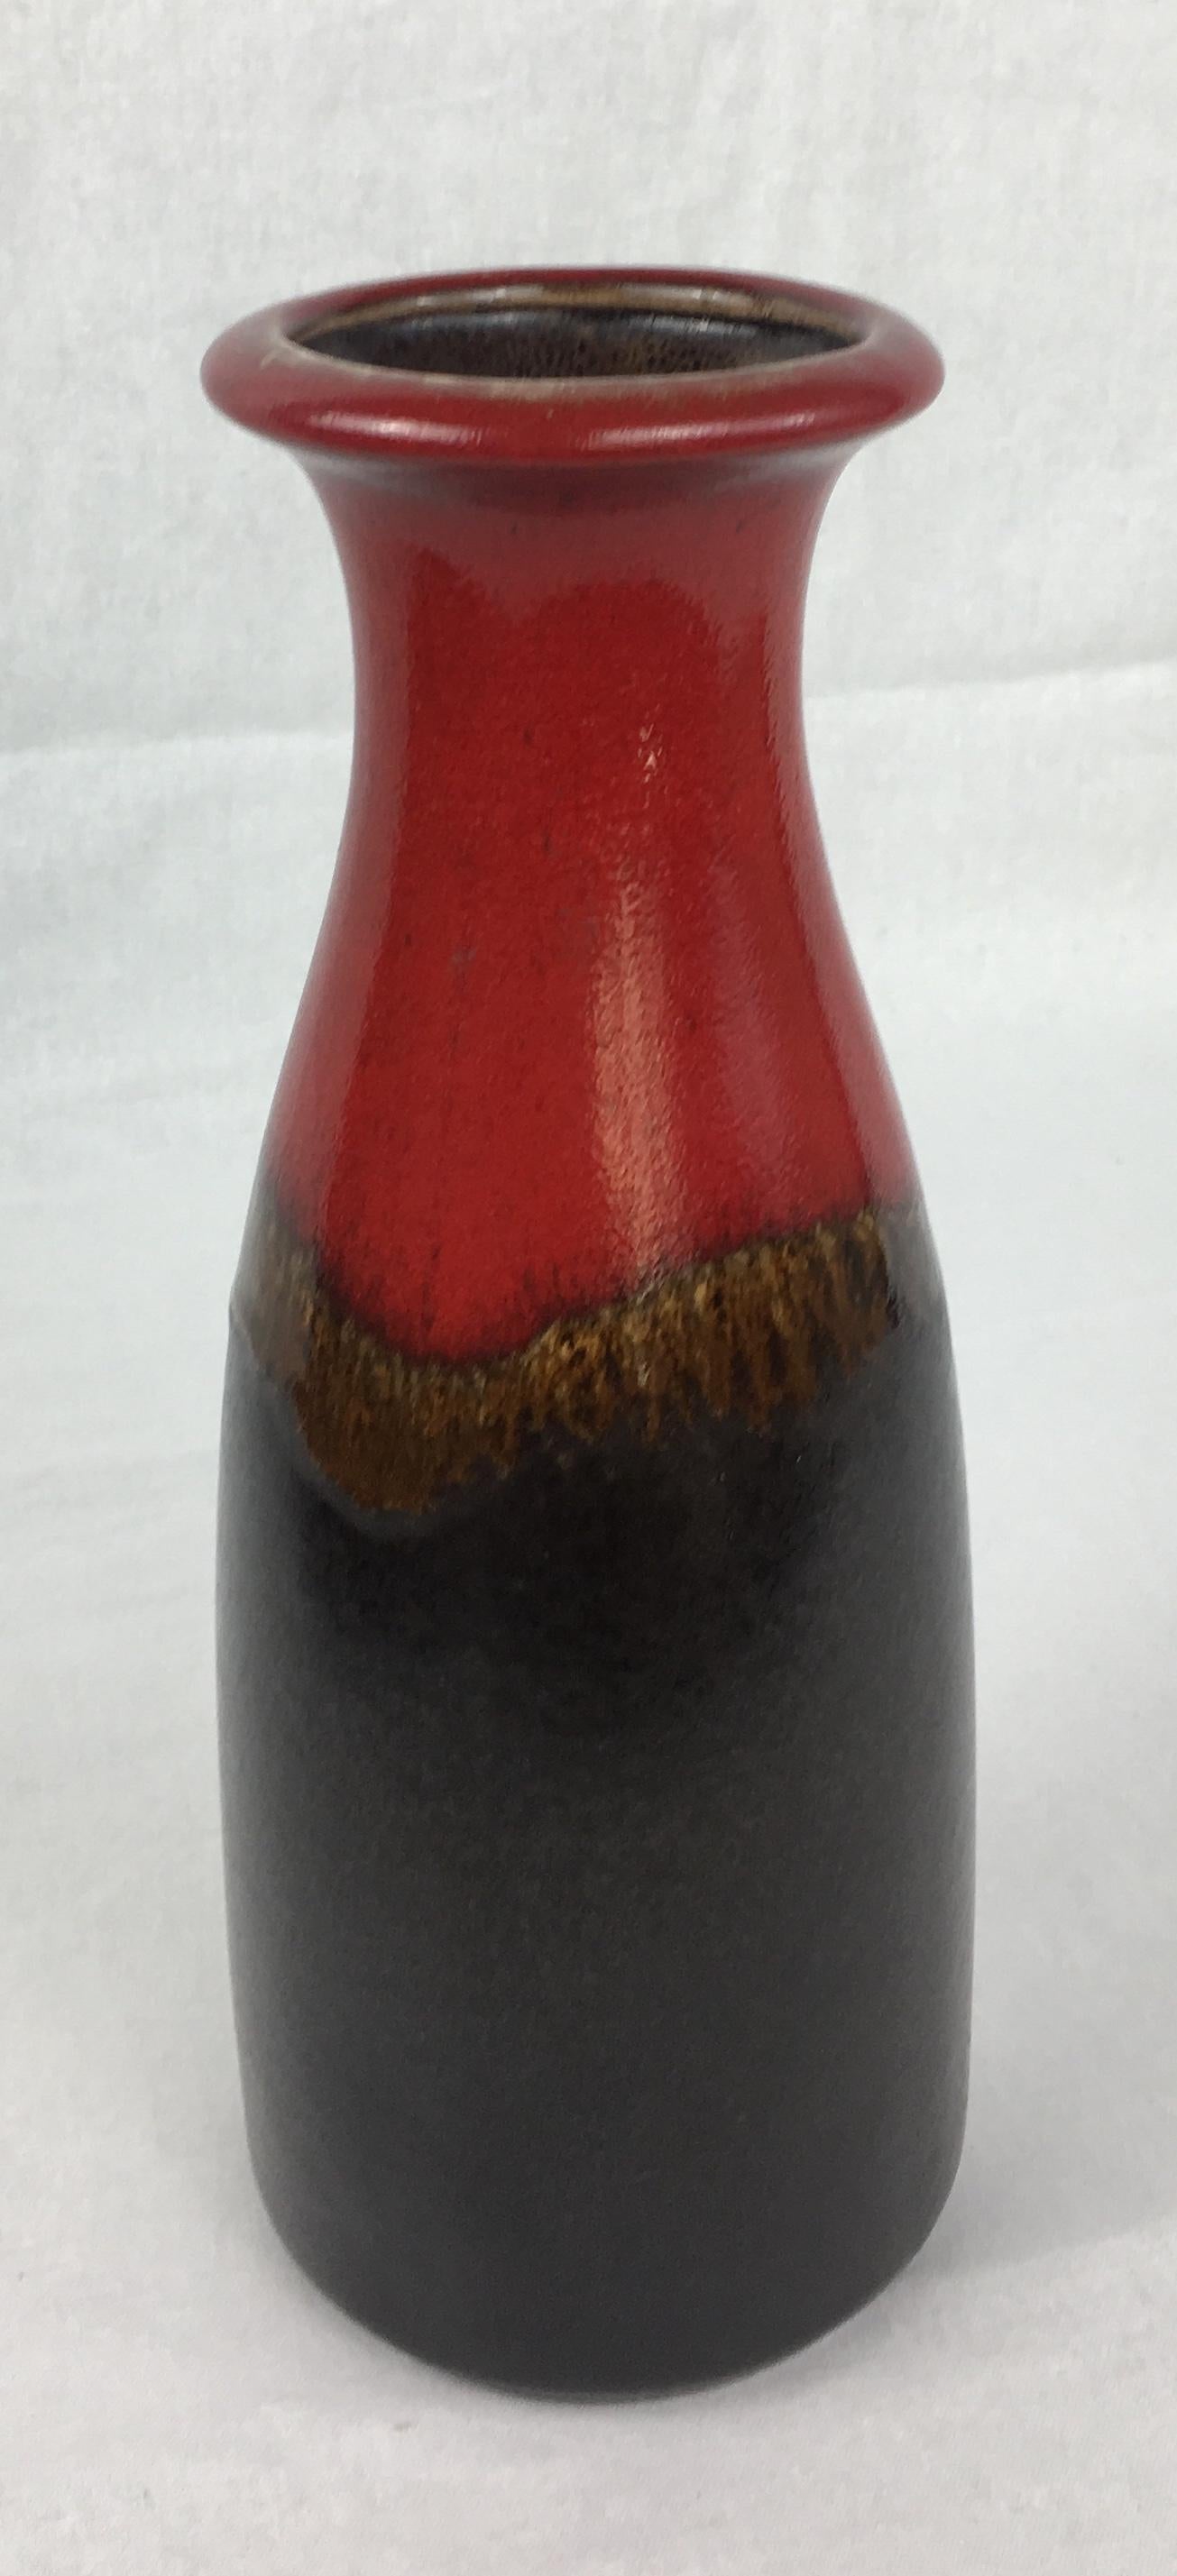 Beautiful West German vase handcrafted for Scheurich Keramik with prominent red and black-brown hues. 

Bottom raised letters W. Germany and numbered 293-26.
 